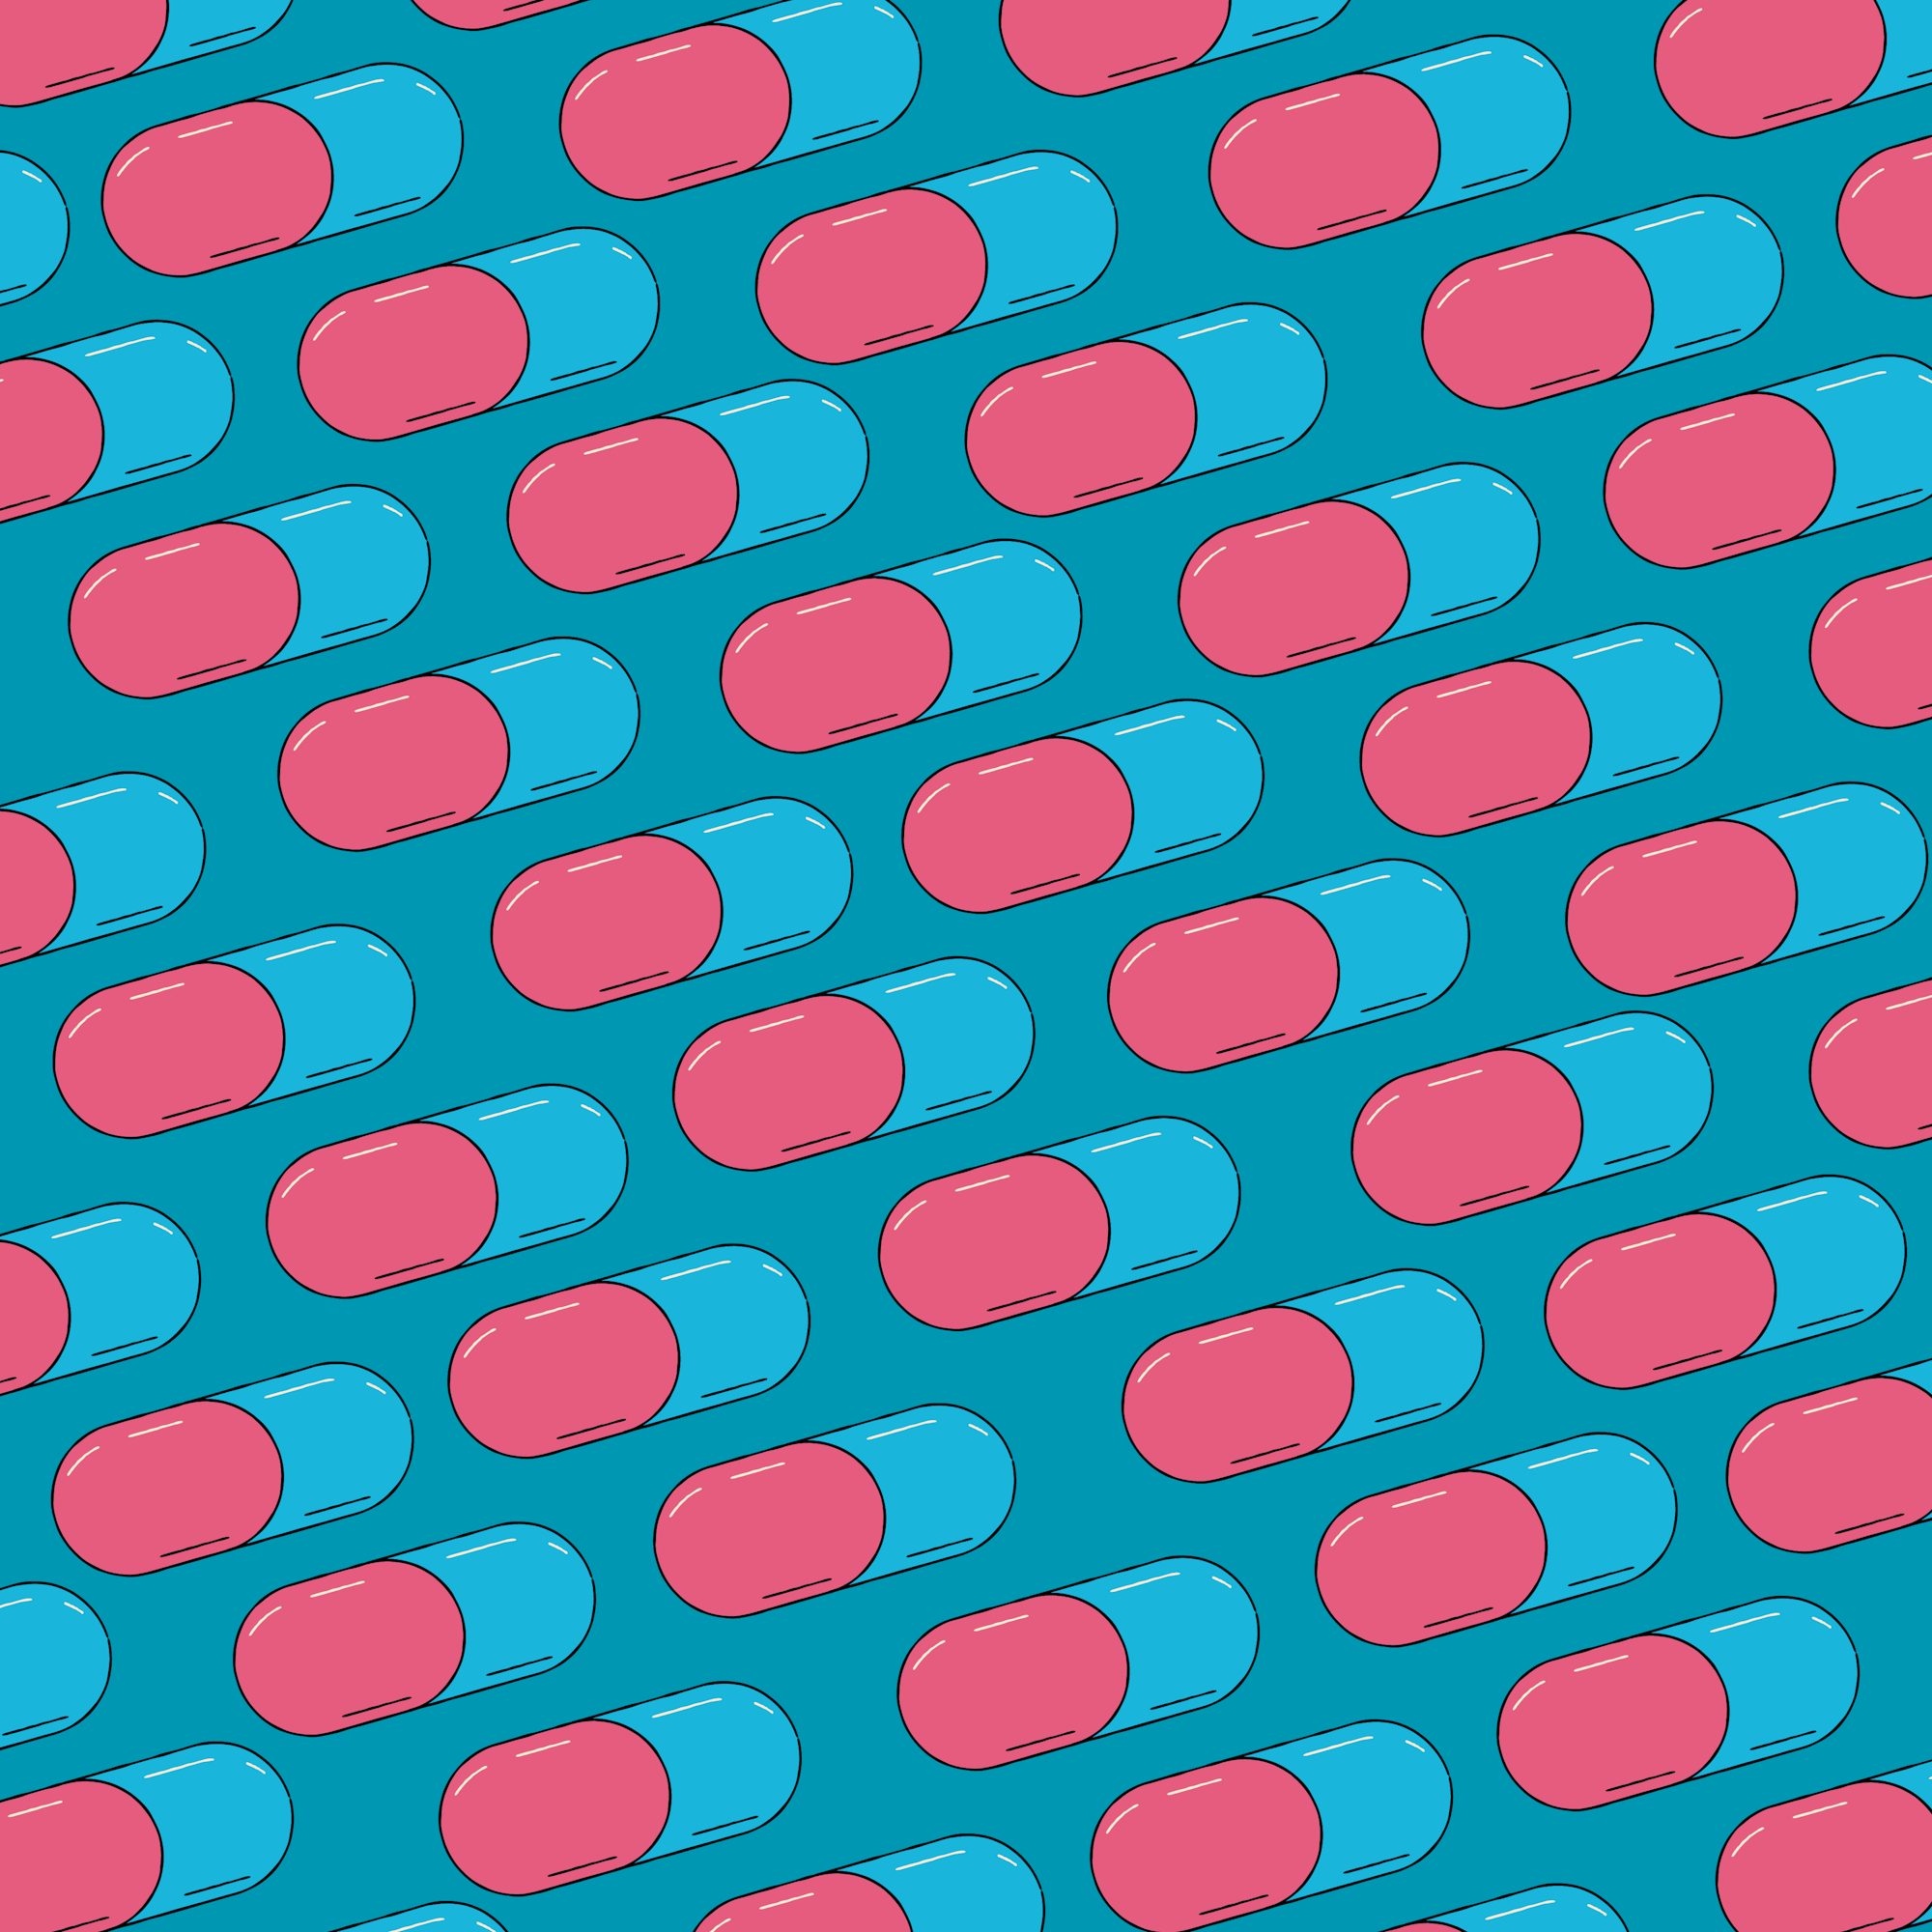 Graphic pattern of blue and red pills on blue background.